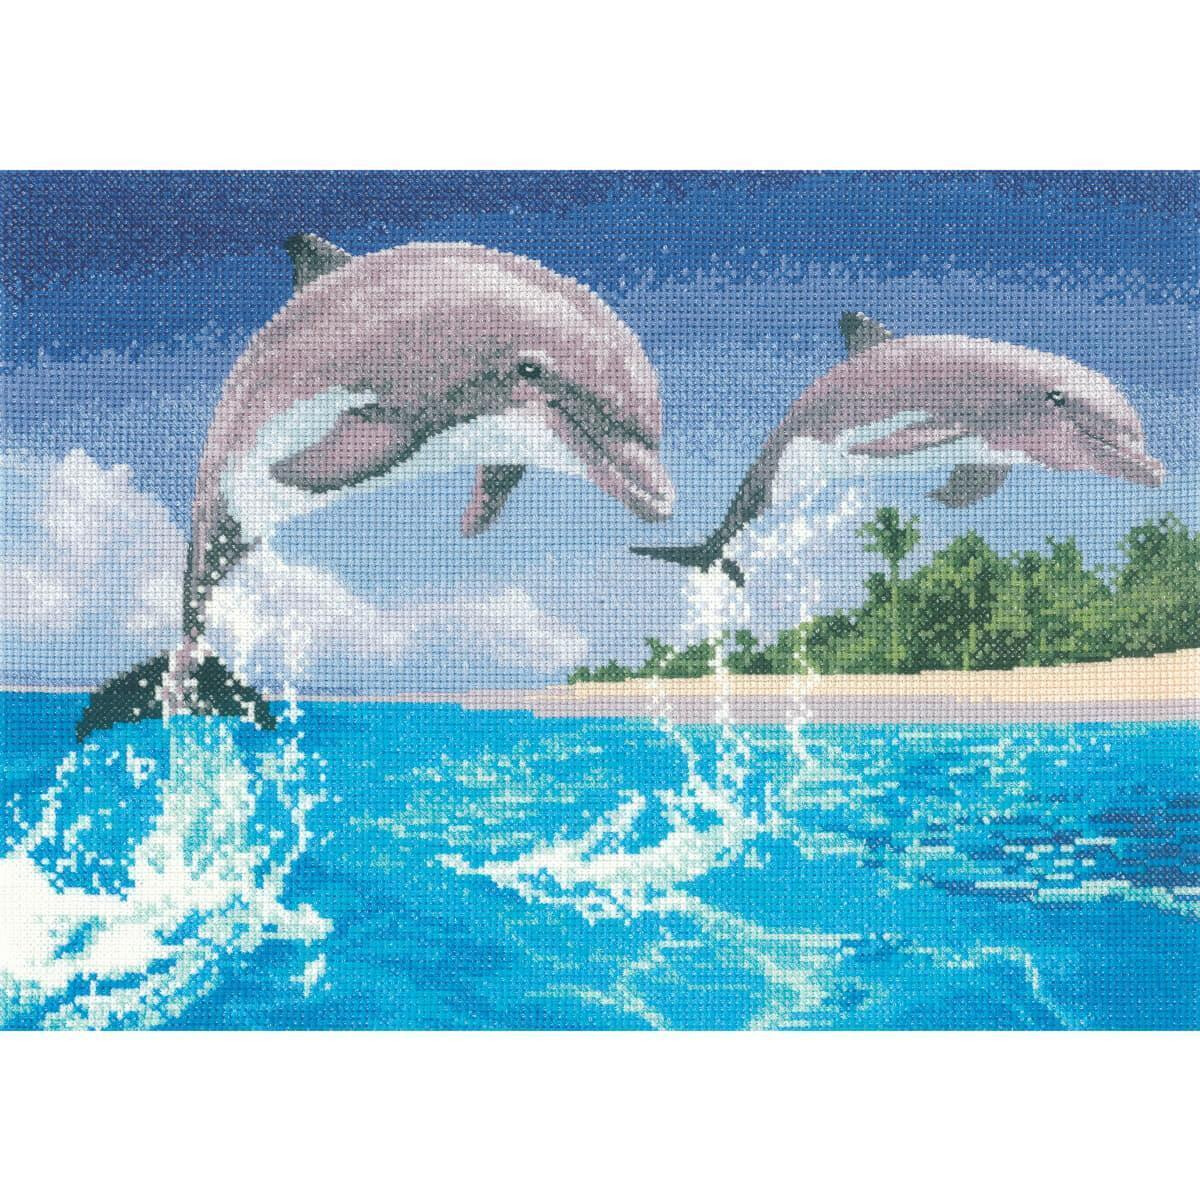 Heritage counted cross stitch kit Aida "Dolphins...